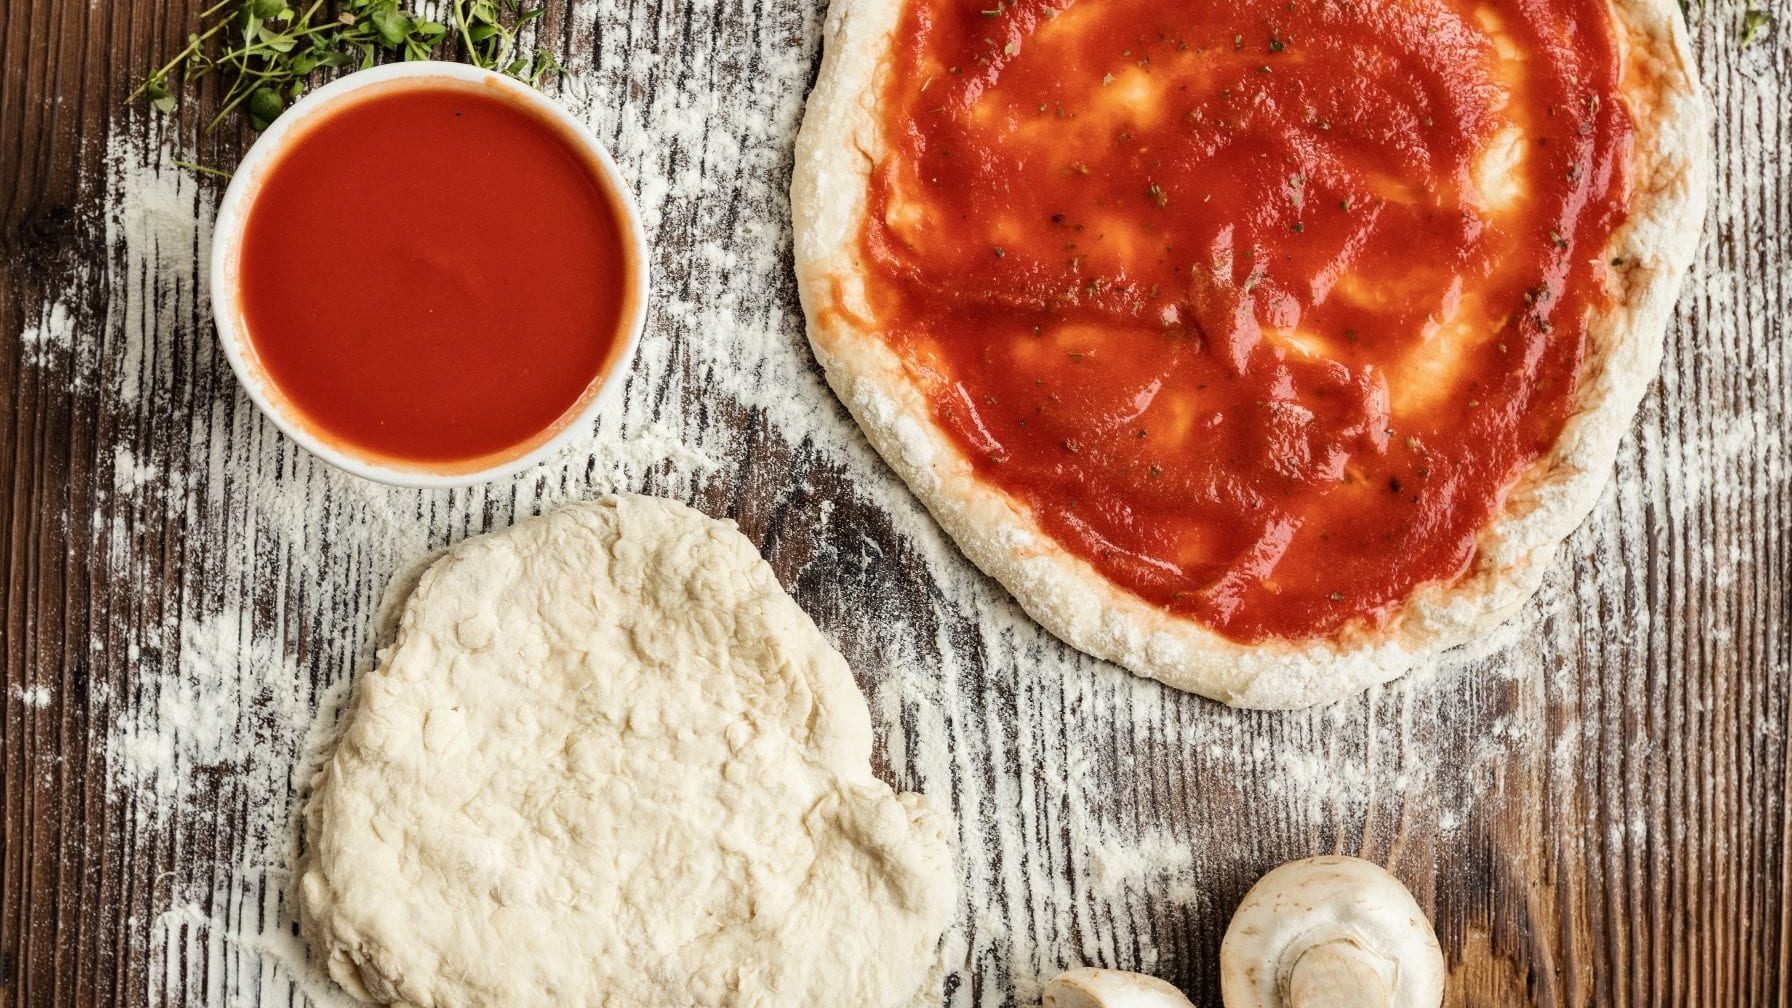 Salty Pig Pizza Kits - Boston Restaurant News and Events